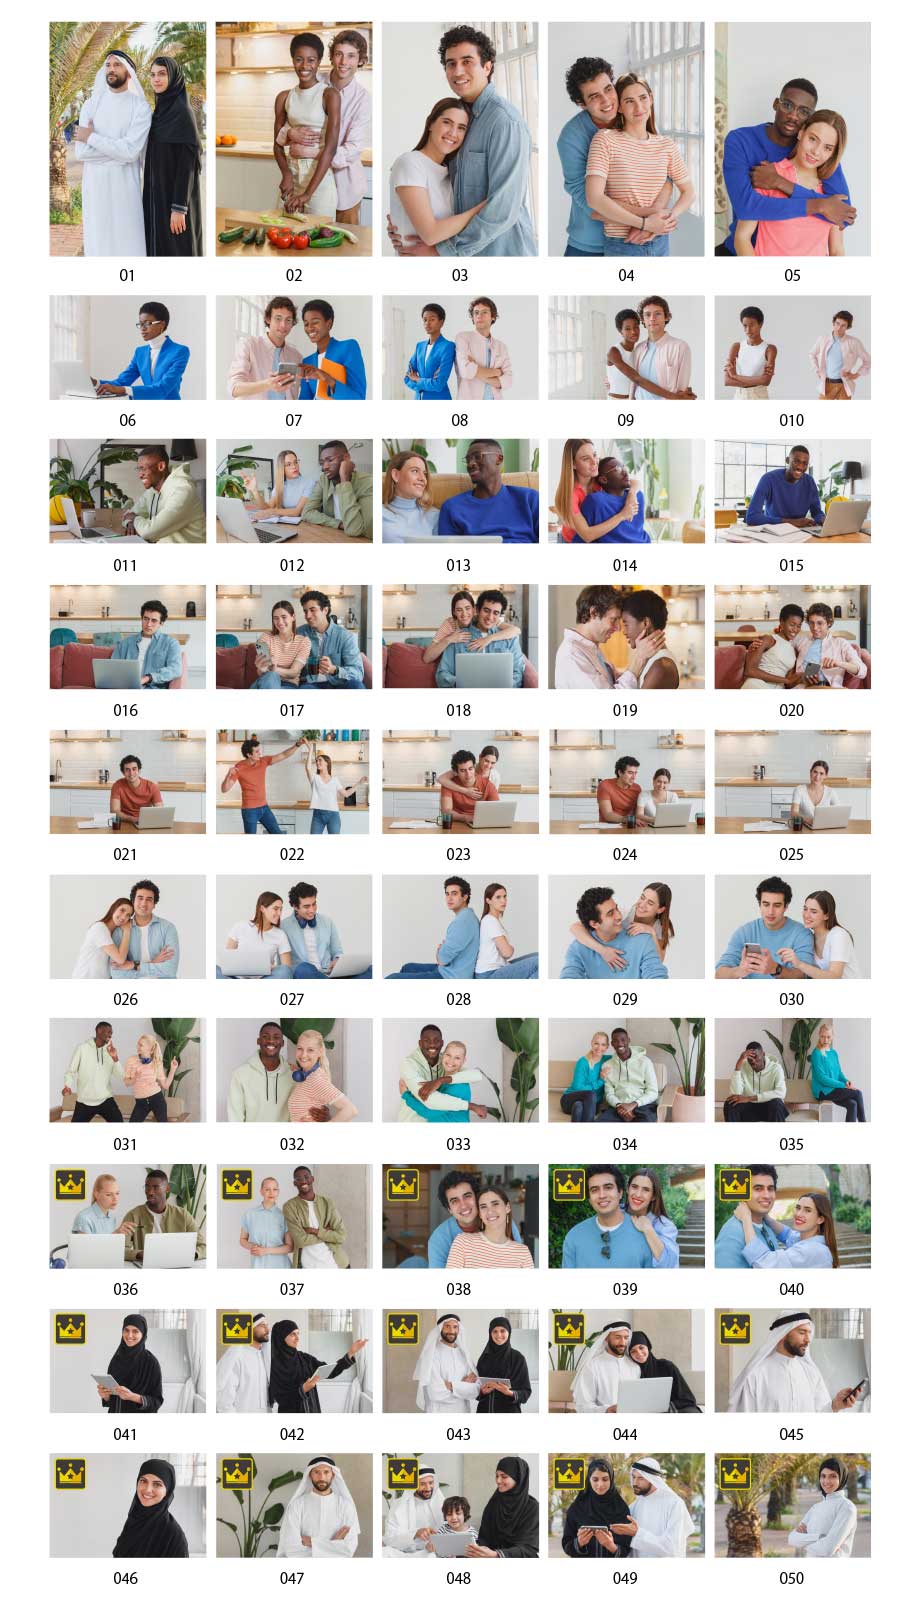 Photos of multicultural couples